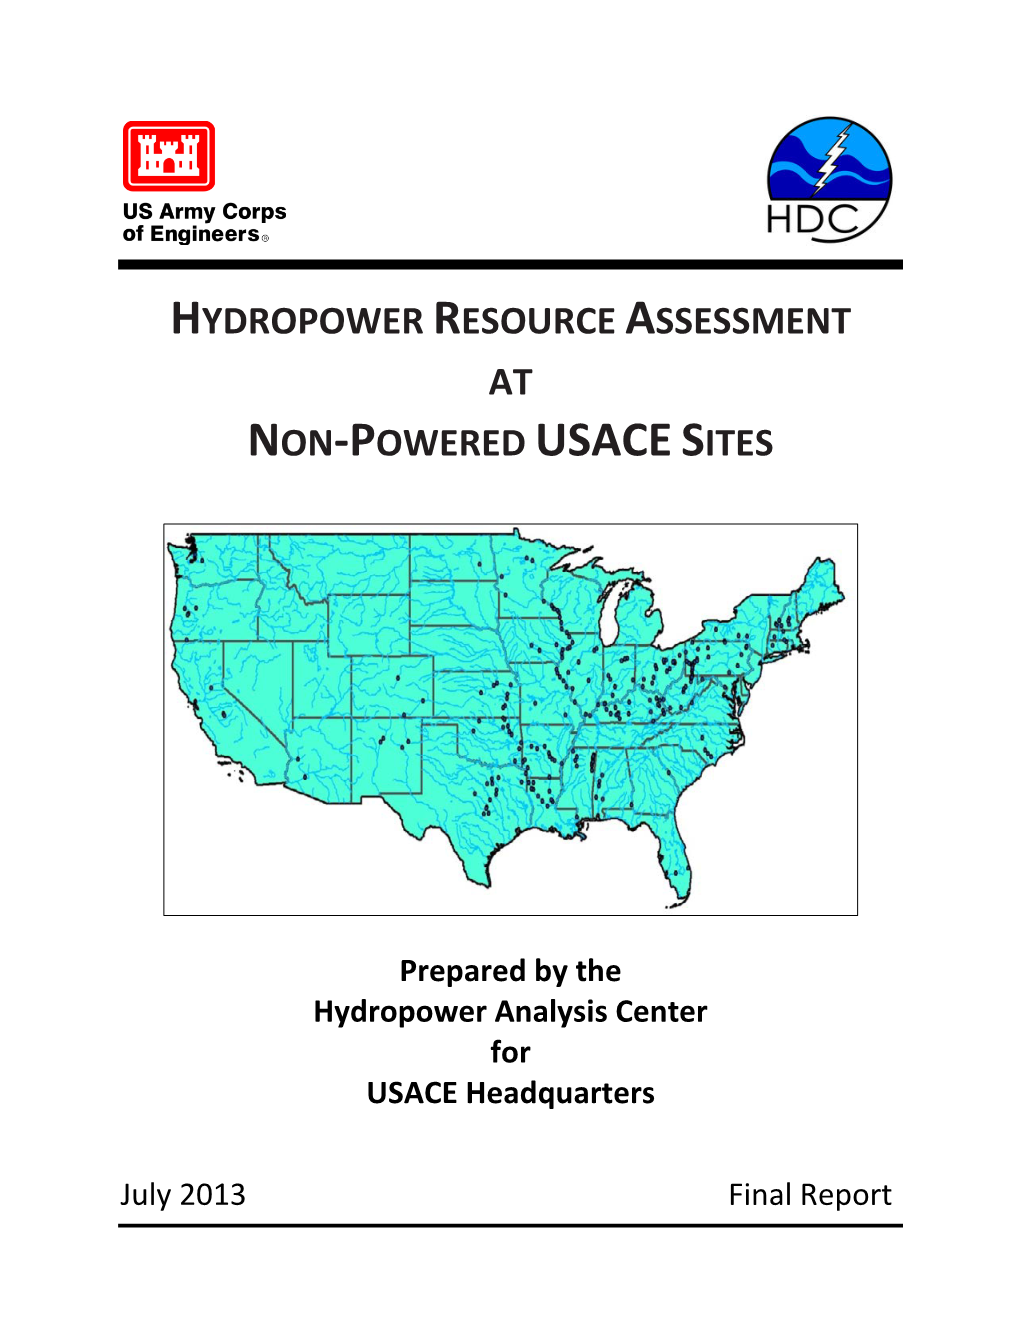 Hydropower Resource Assessment at Non-Powered Usace Sites